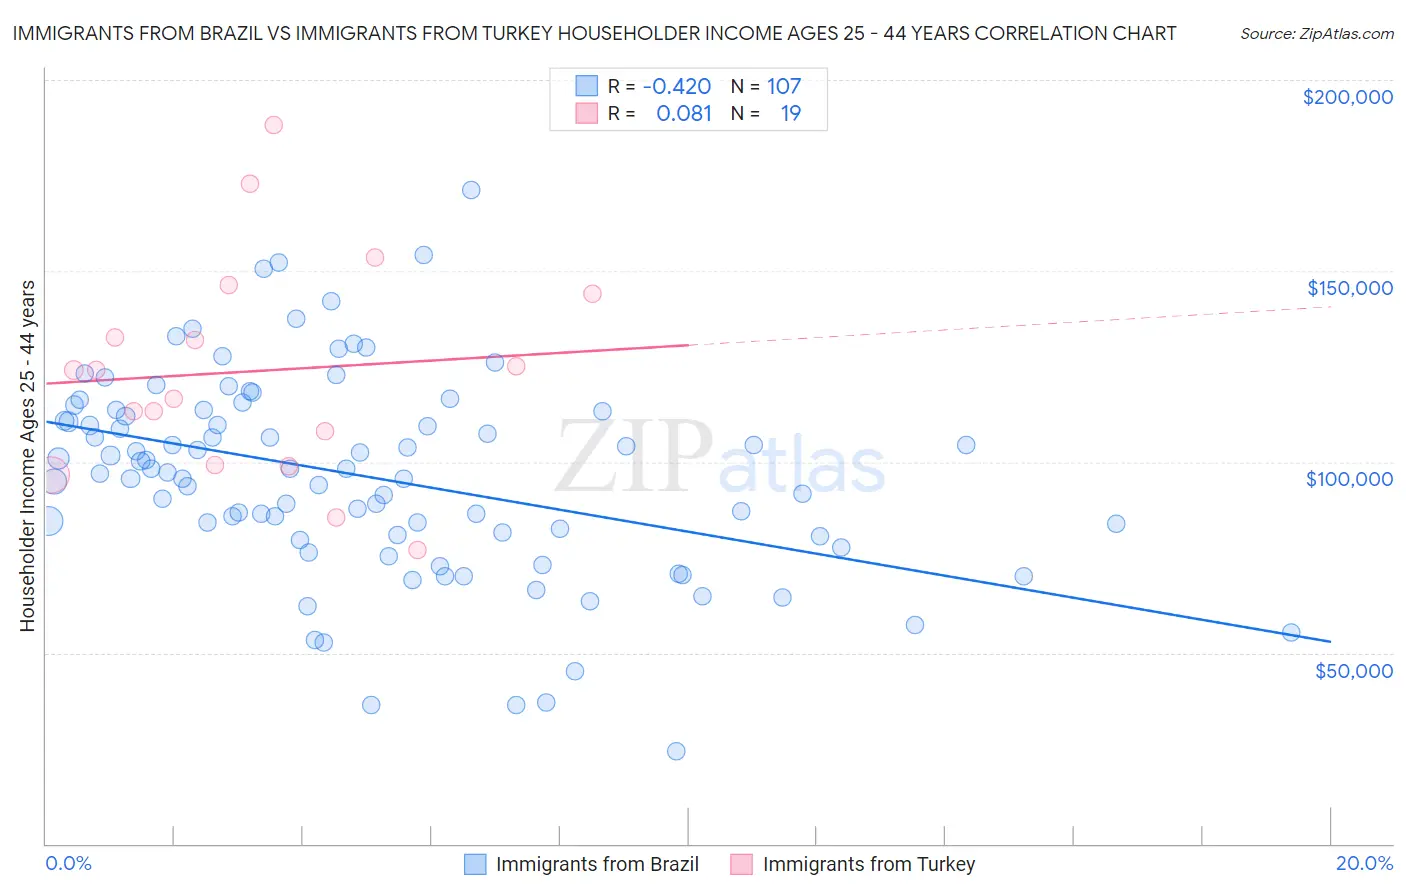 Immigrants from Brazil vs Immigrants from Turkey Householder Income Ages 25 - 44 years